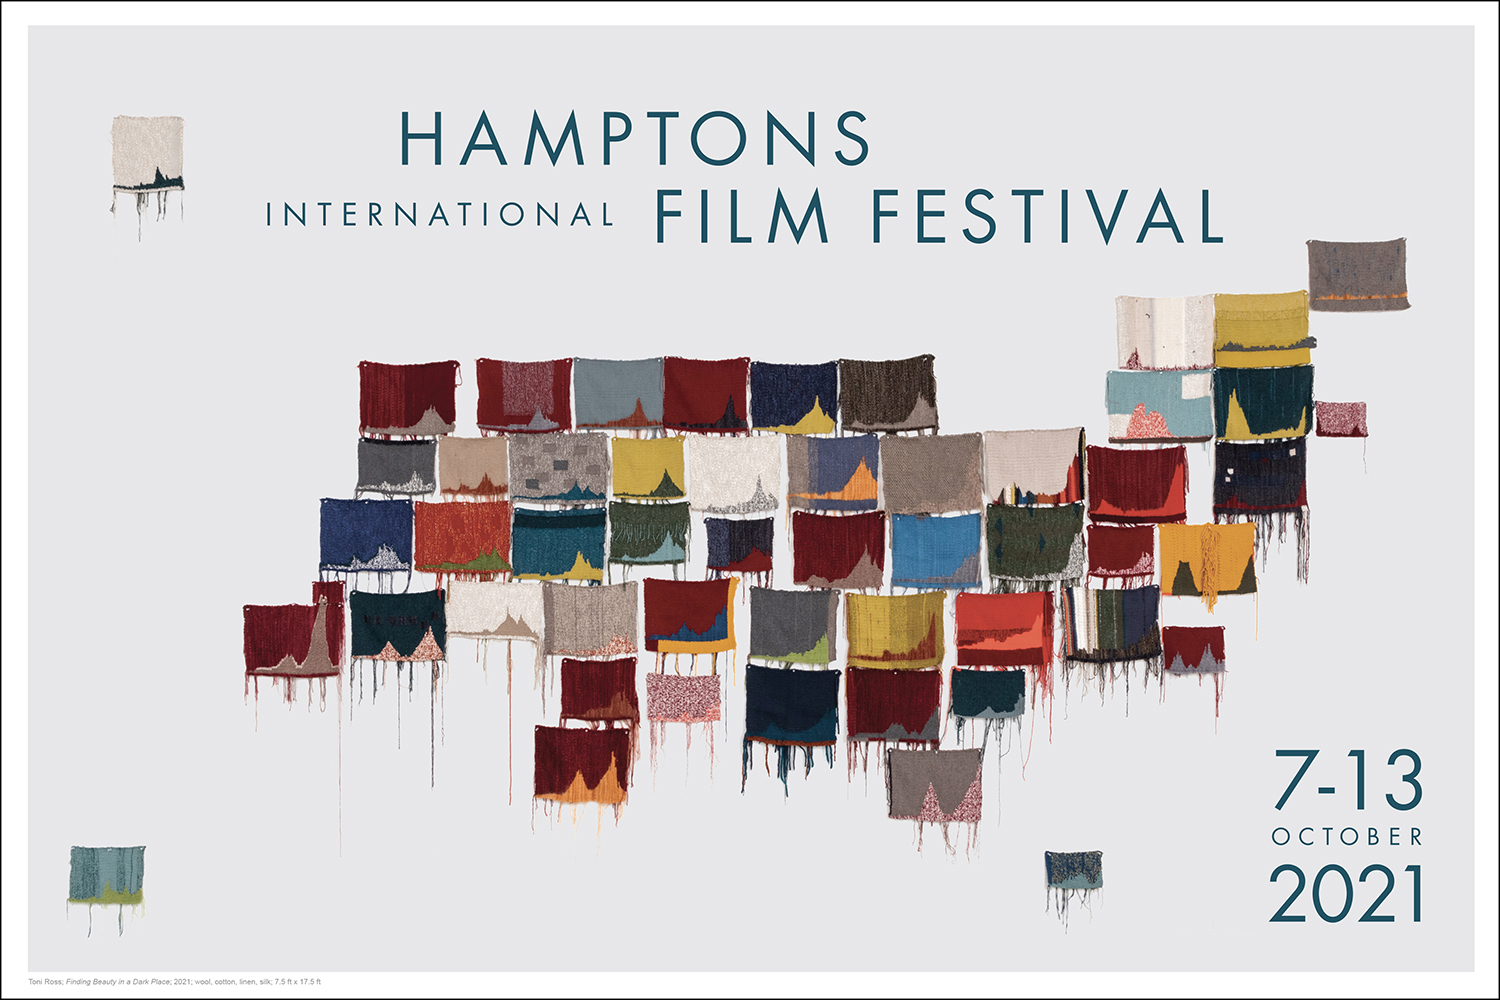 The 2021 Hamptons Film Festival poster featuring "Finding Beauty in a Dark Place" by Toni Ross